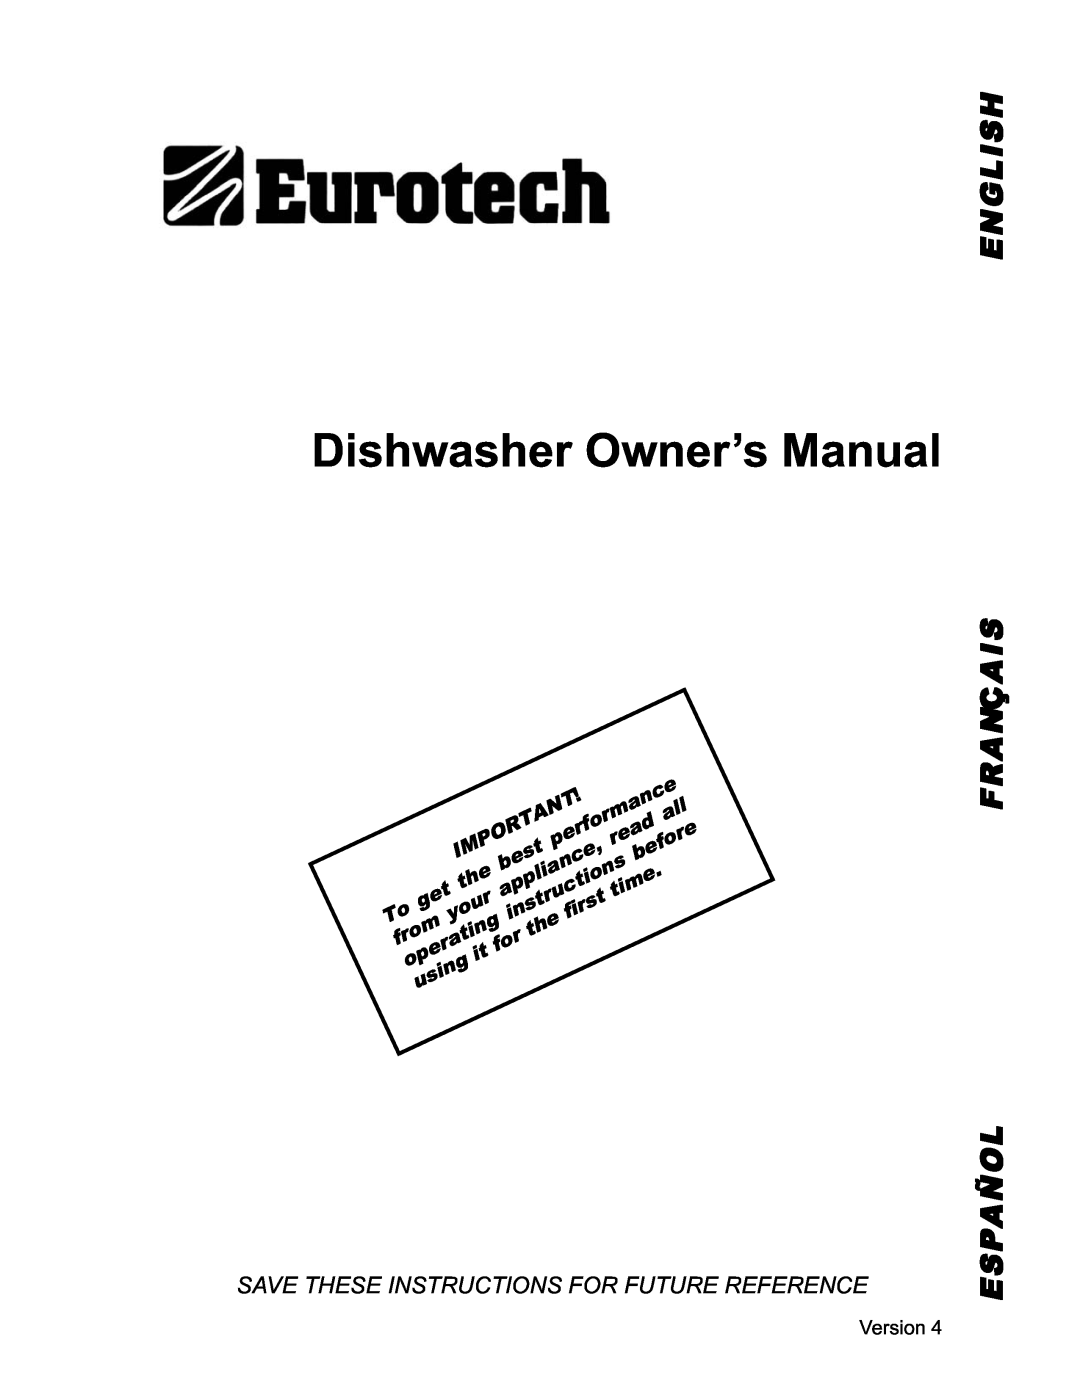 Eurotech Appliances EDW242C owner manual English F R A Nça I S, Save These Instructions For Future Reference, Version 